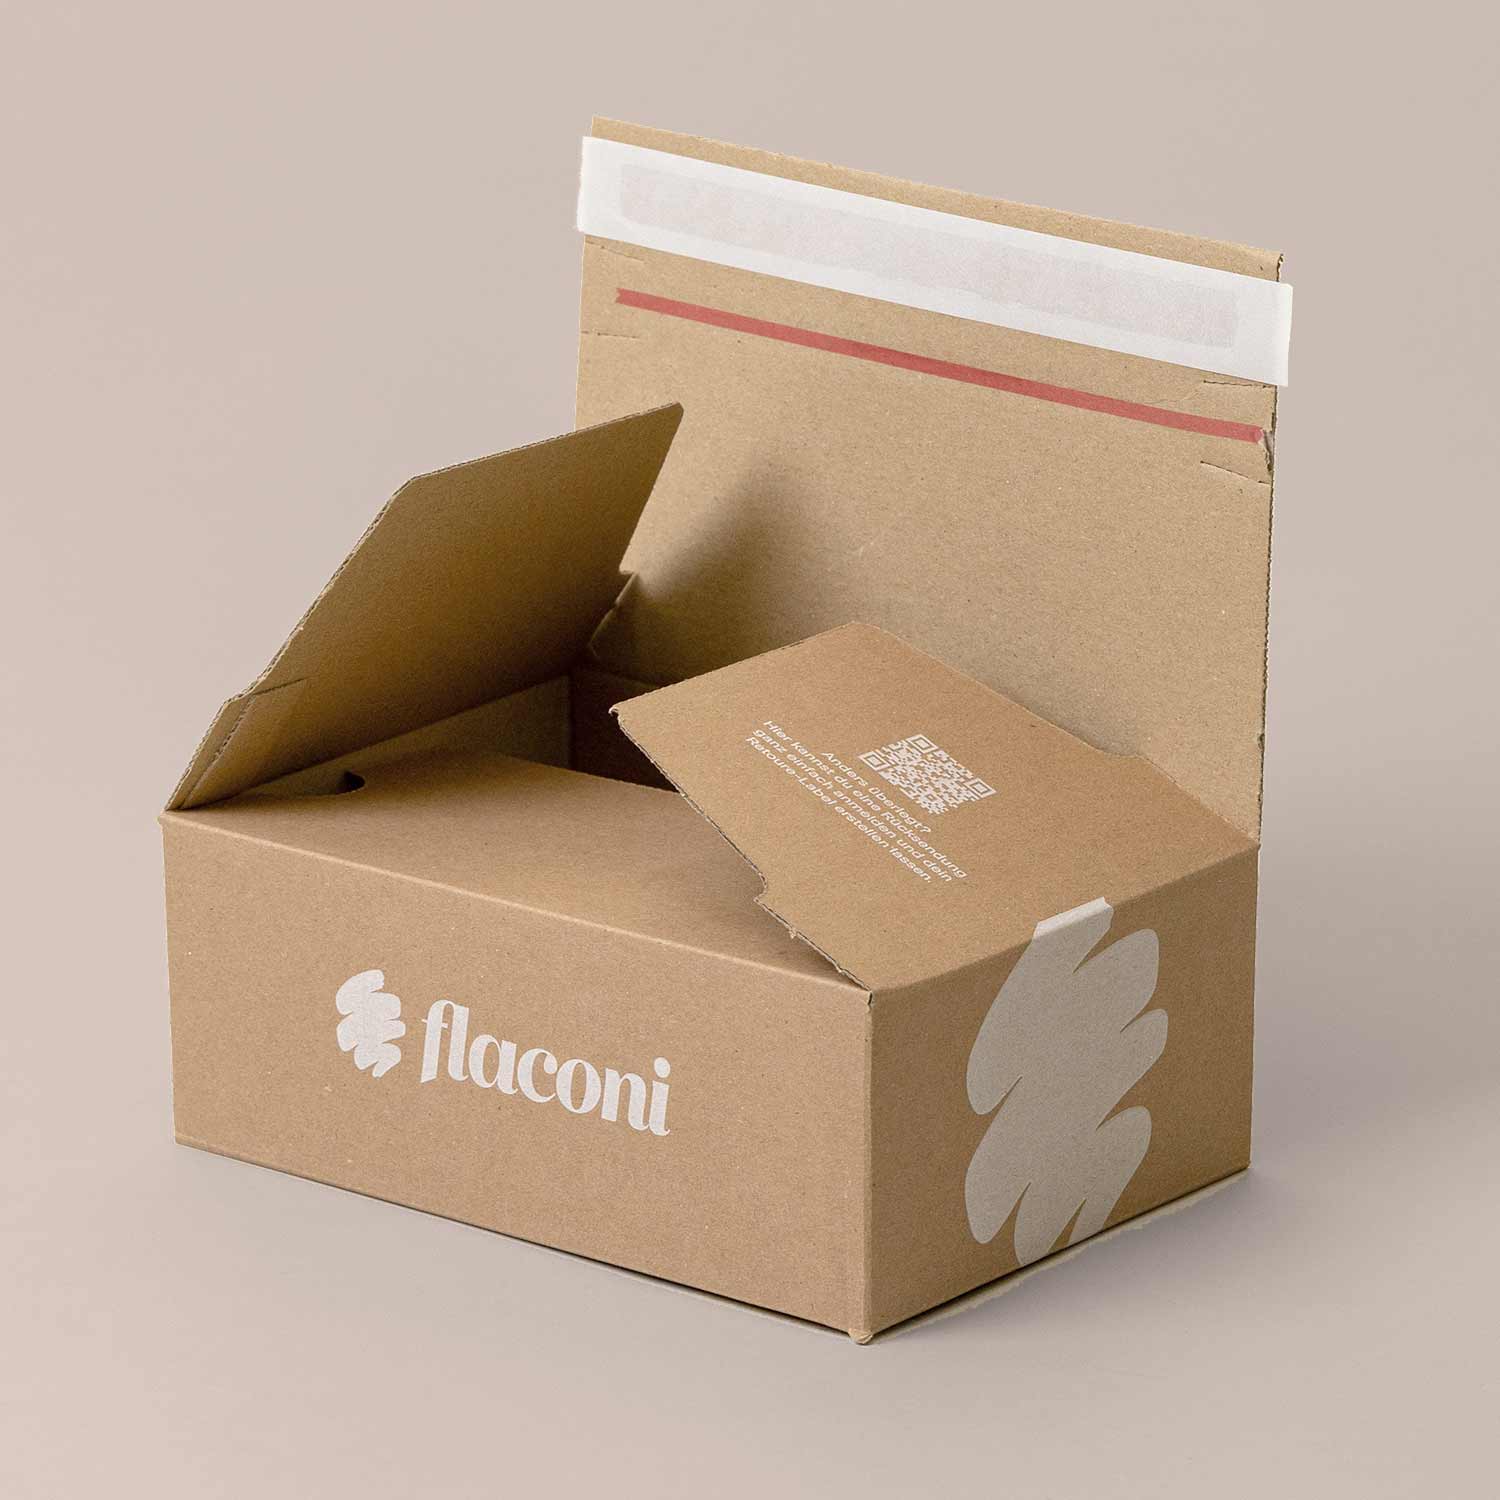 E-commerce box with adhesive strips